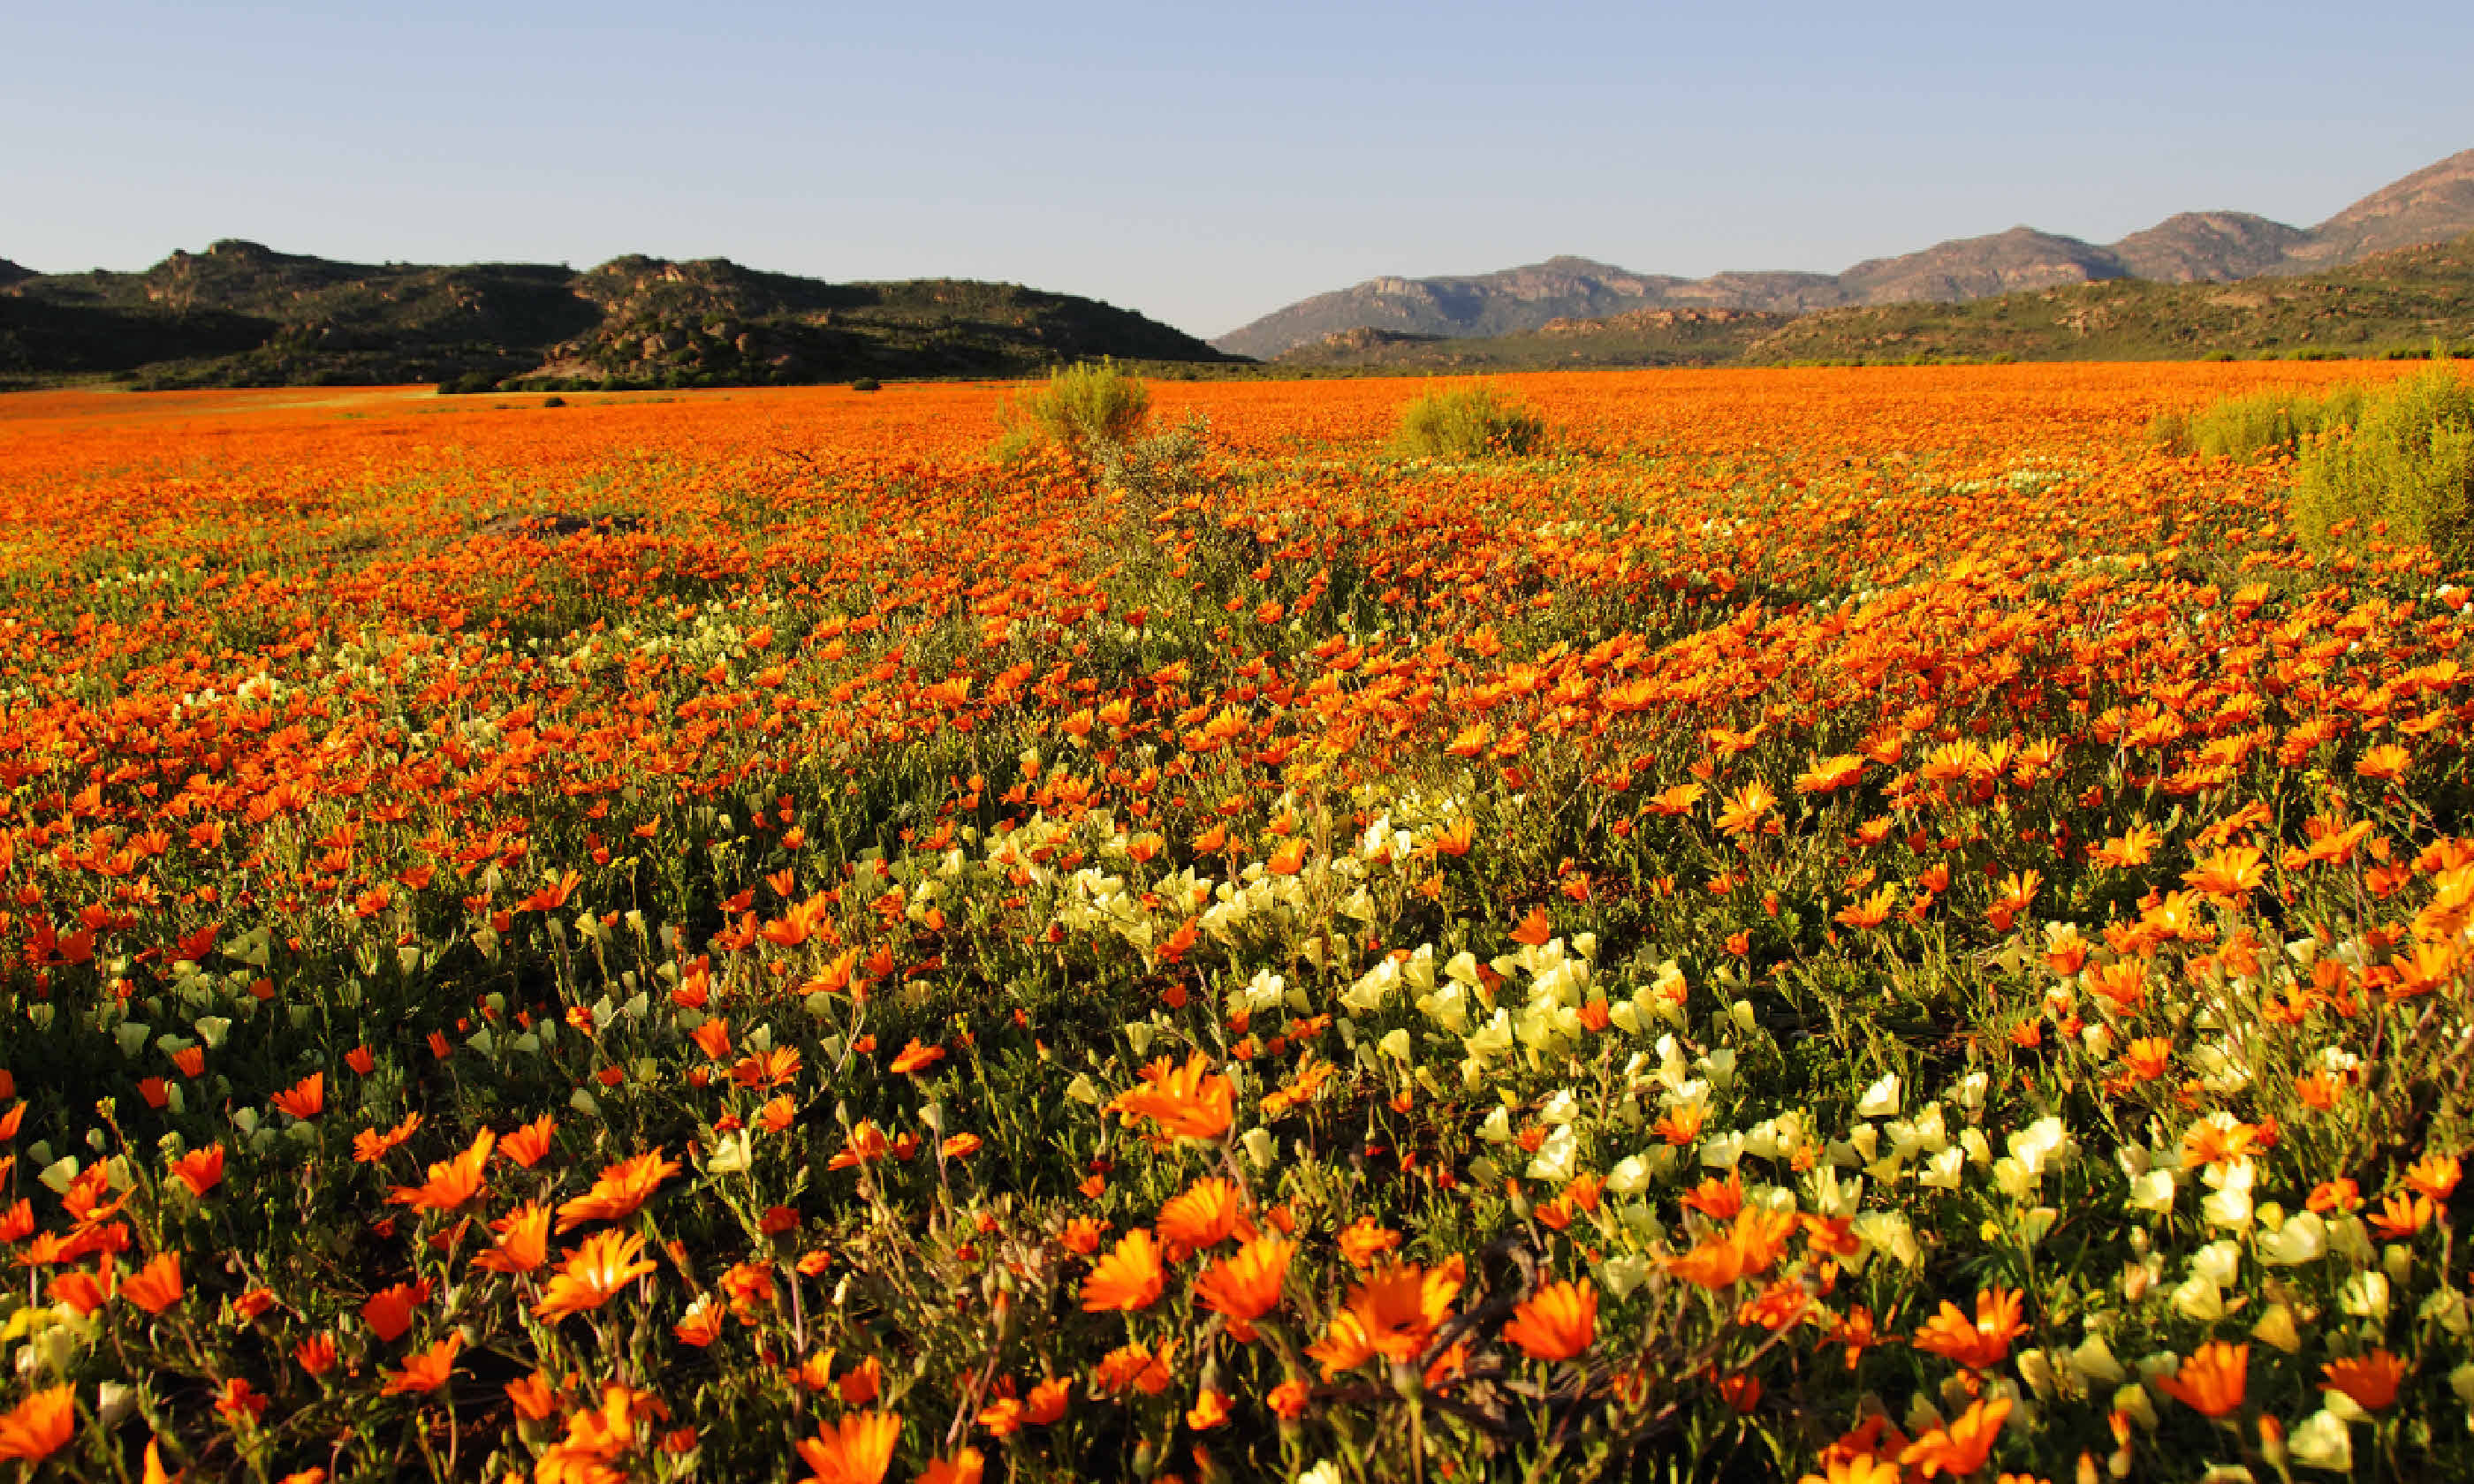 Field of flowers in Namaqualand, South Africa (Shutterstock)